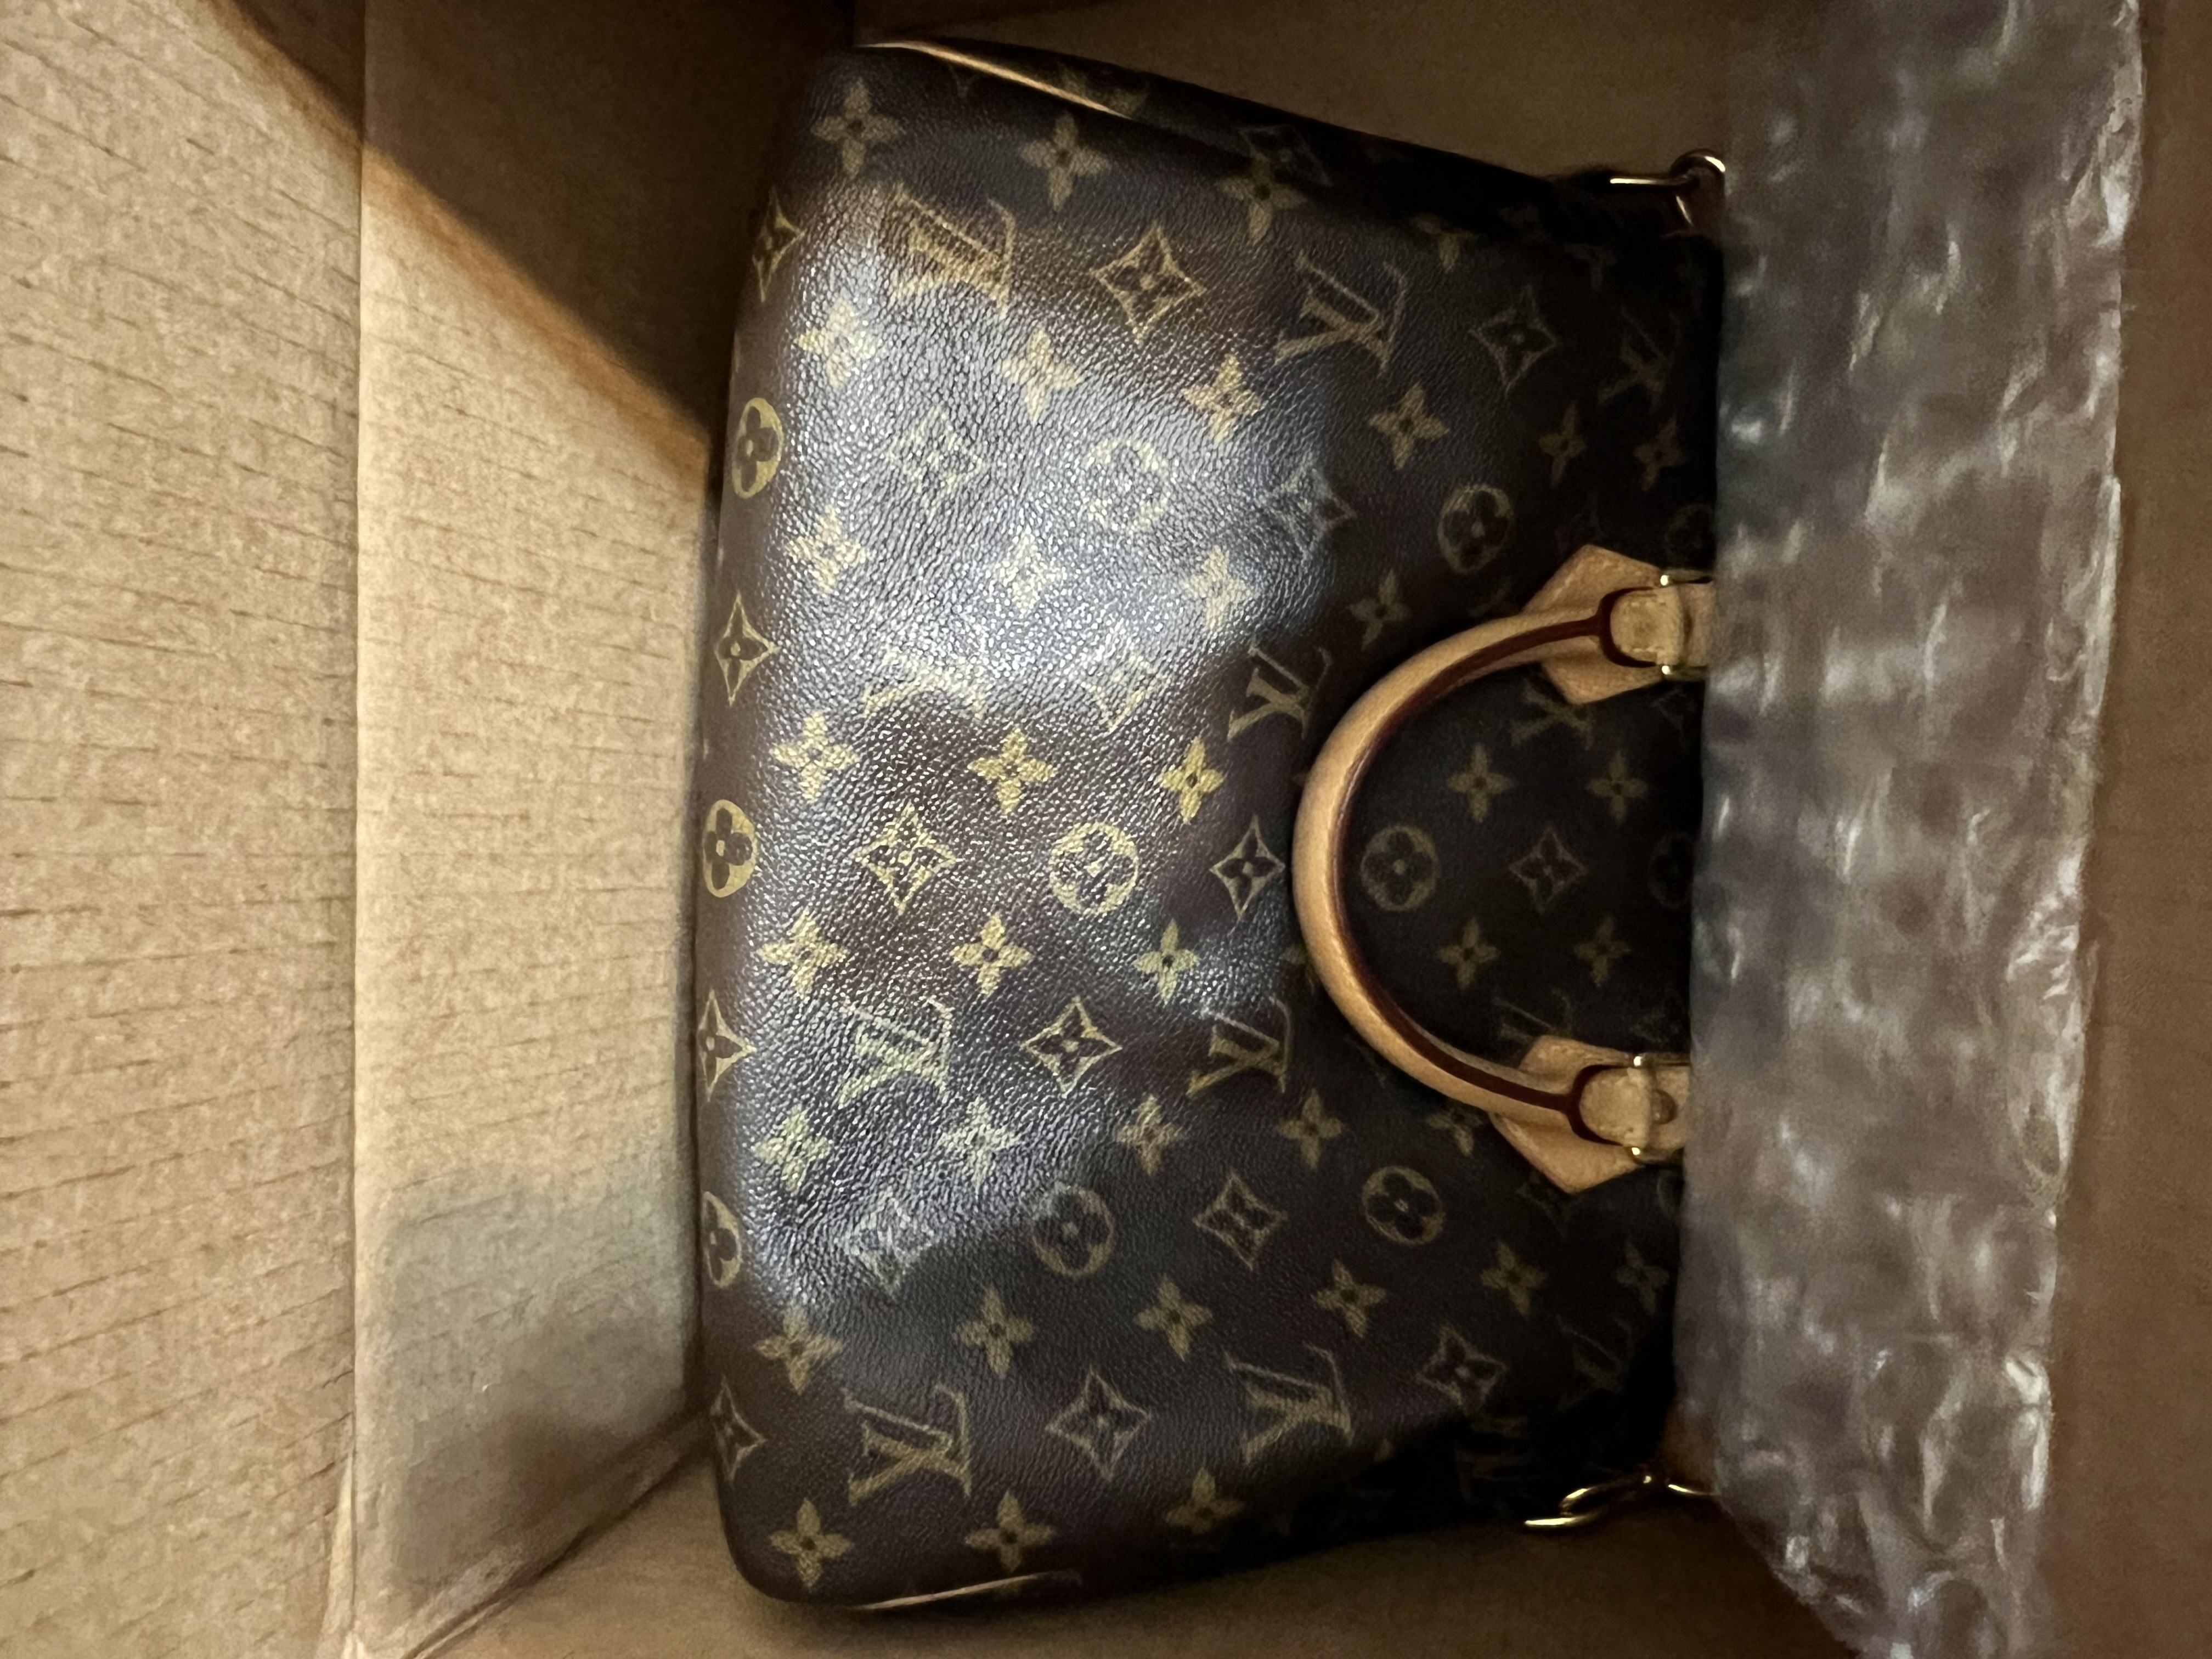 Does anyone know what this bag is called? I can't find it on LVs website :  r/Louisvuitton